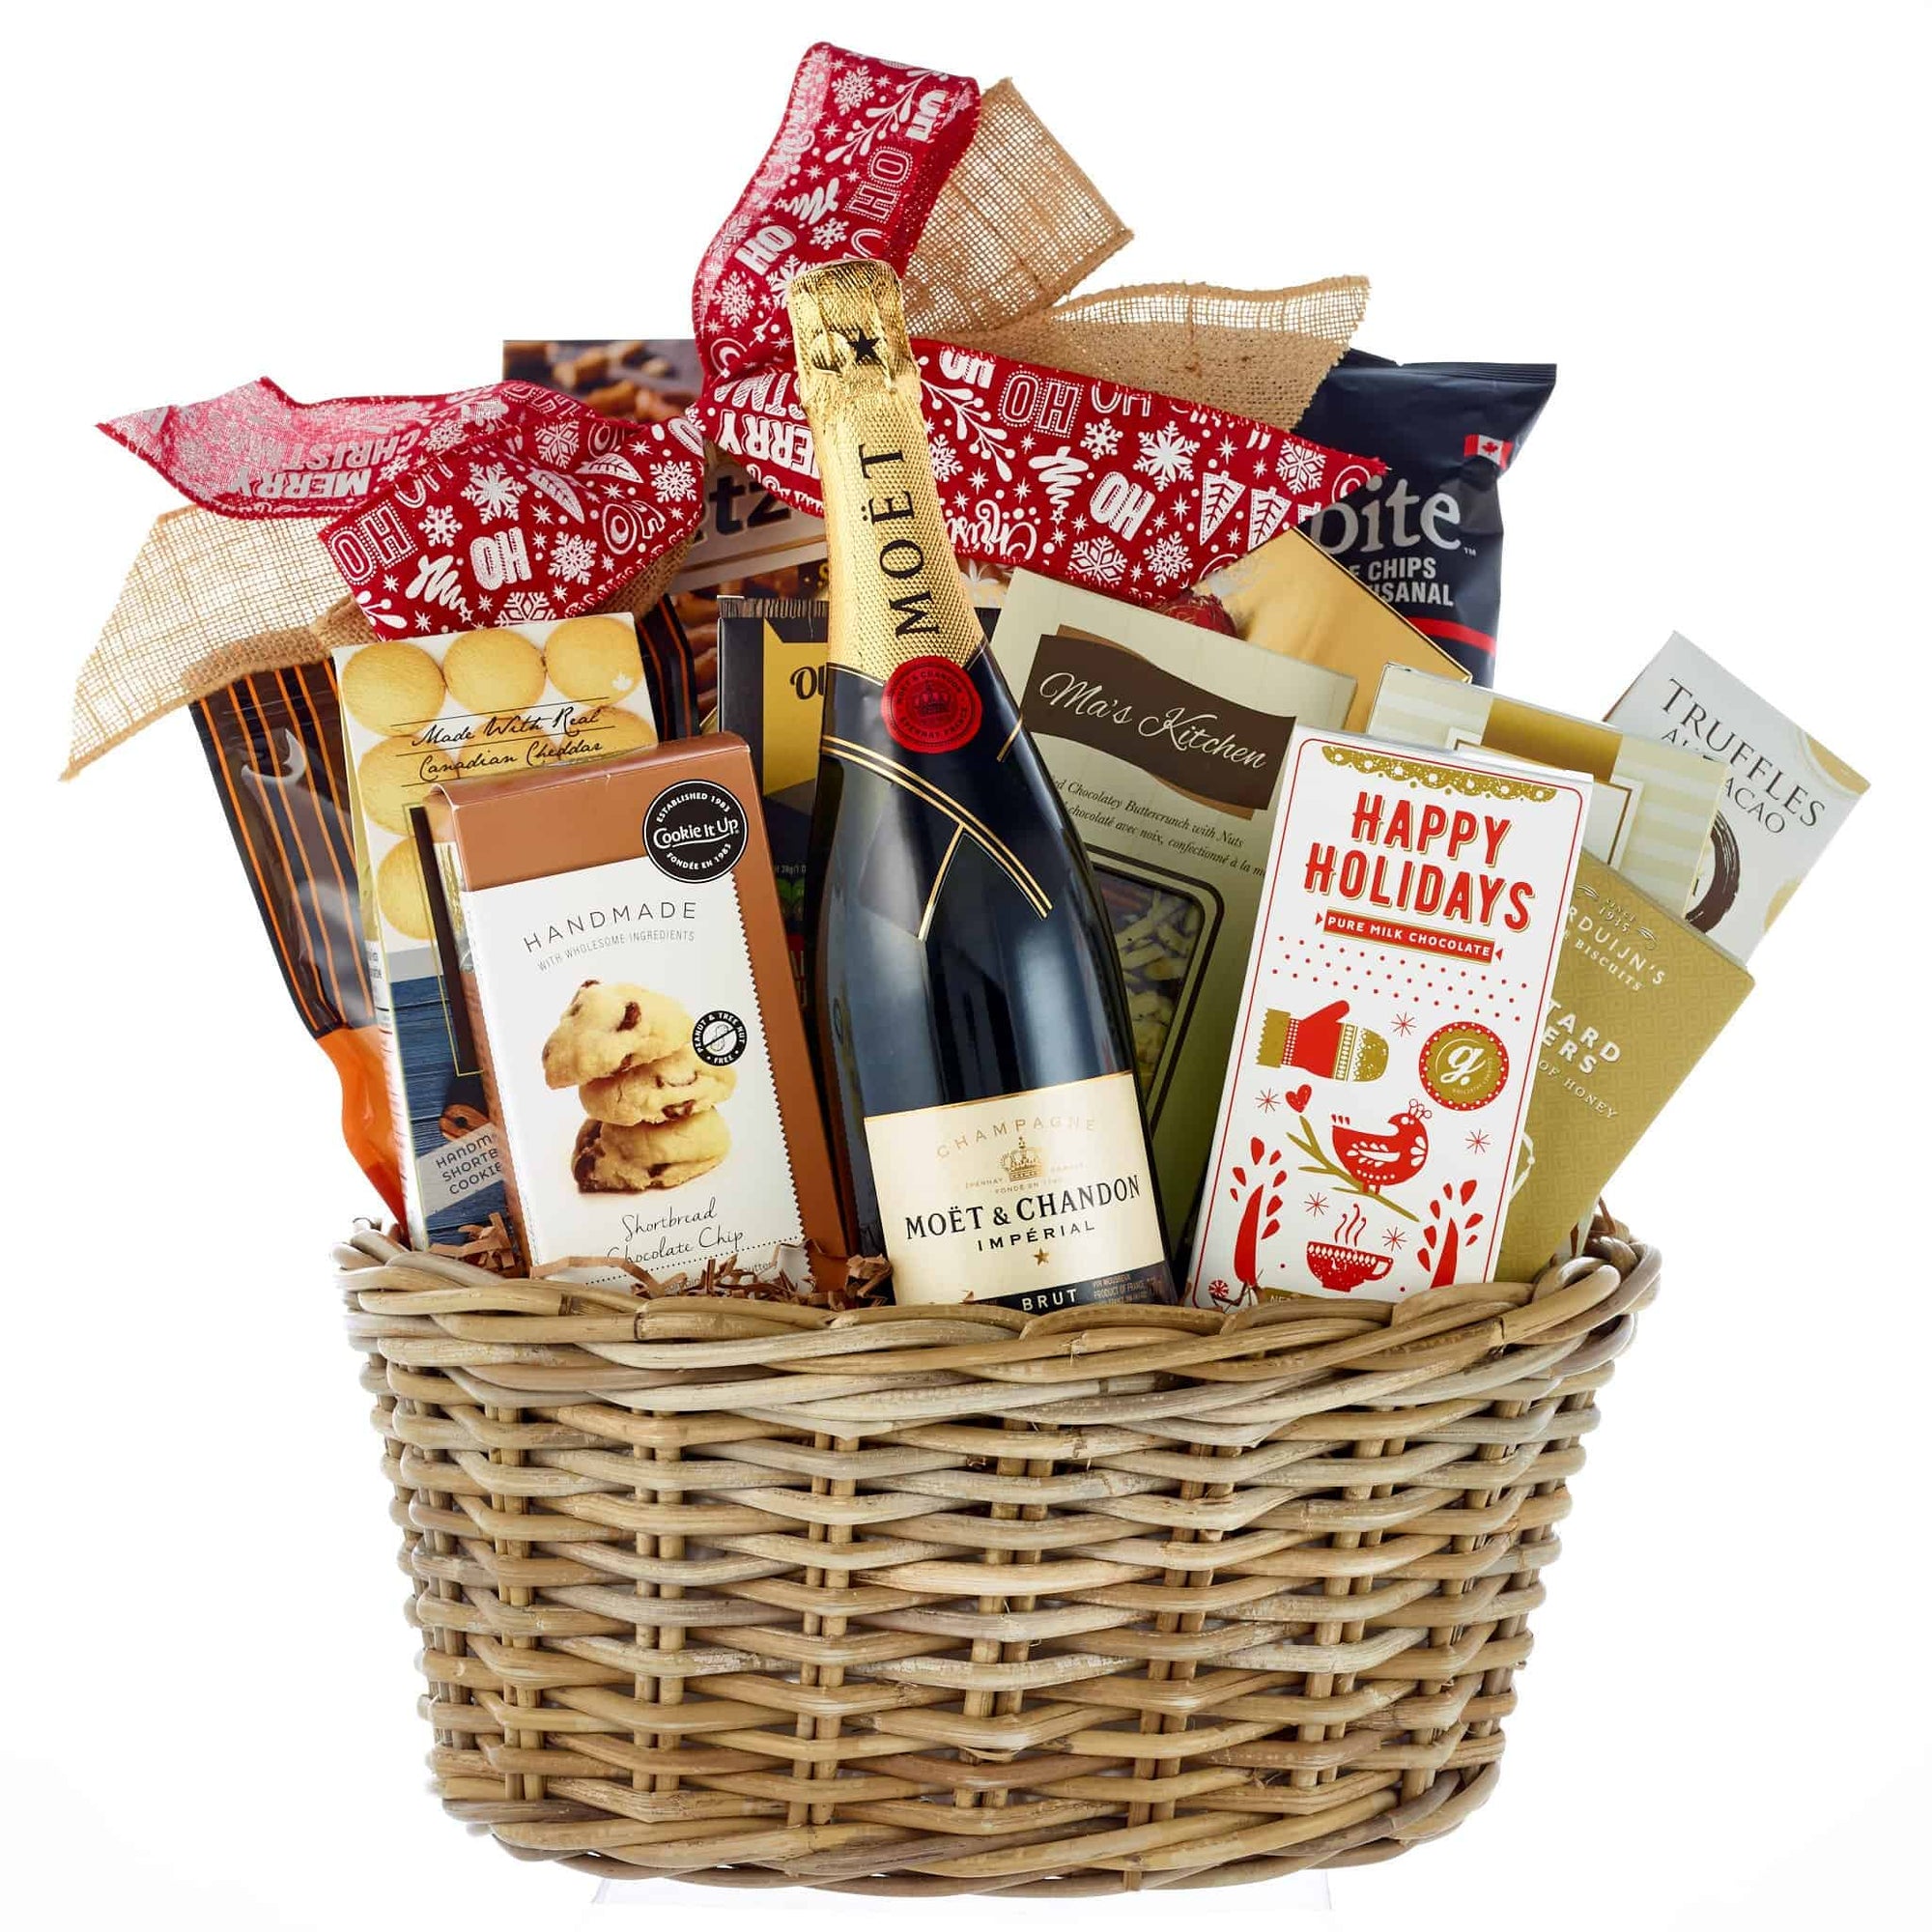 Christmas holiday gift basket with Moet and Chandon French Champagne.